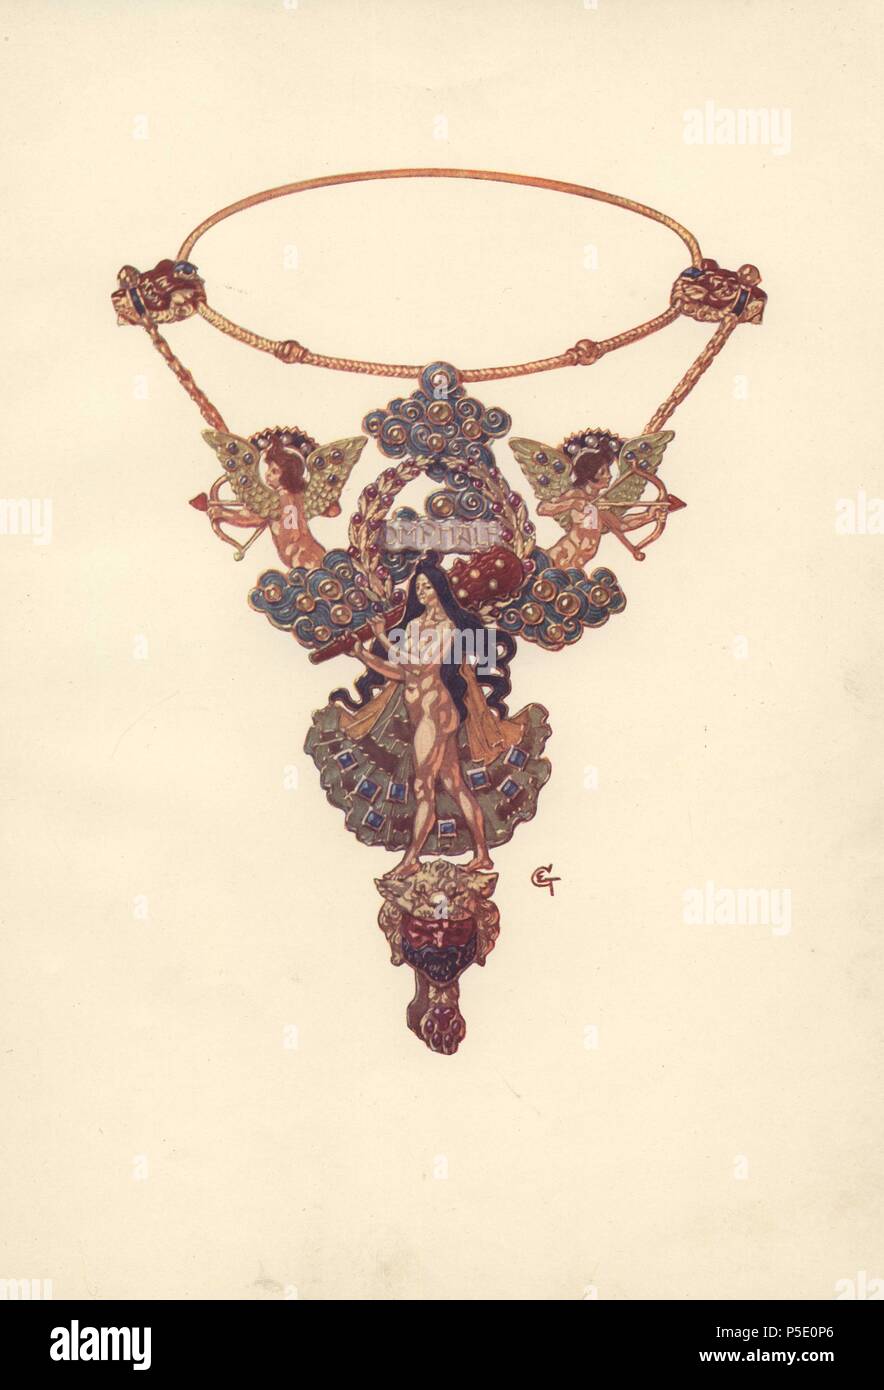 French art nouveau pendant and necklet by Eugene Grasset (1845–1917), Swiss decorative artist of the Belle Epoque.. Color plate from Charles Holme's 'Modern Design in Jewellery and Fans,' published by the Studio 1902. Stock Photo